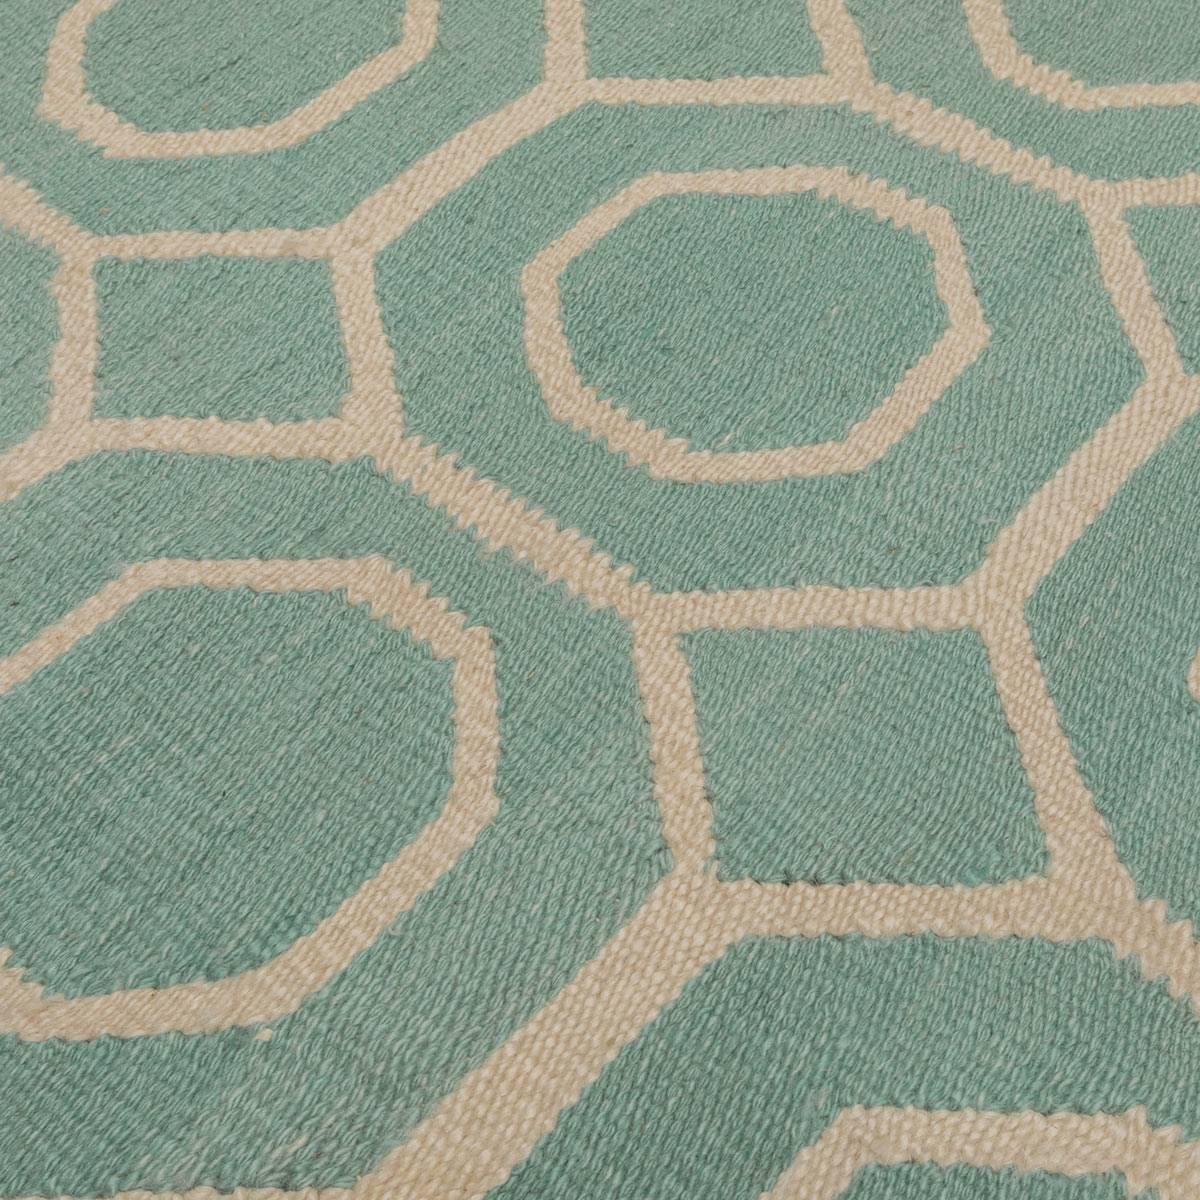 Egyptian Flatweave Rug with Geometric Desig over Green Background.